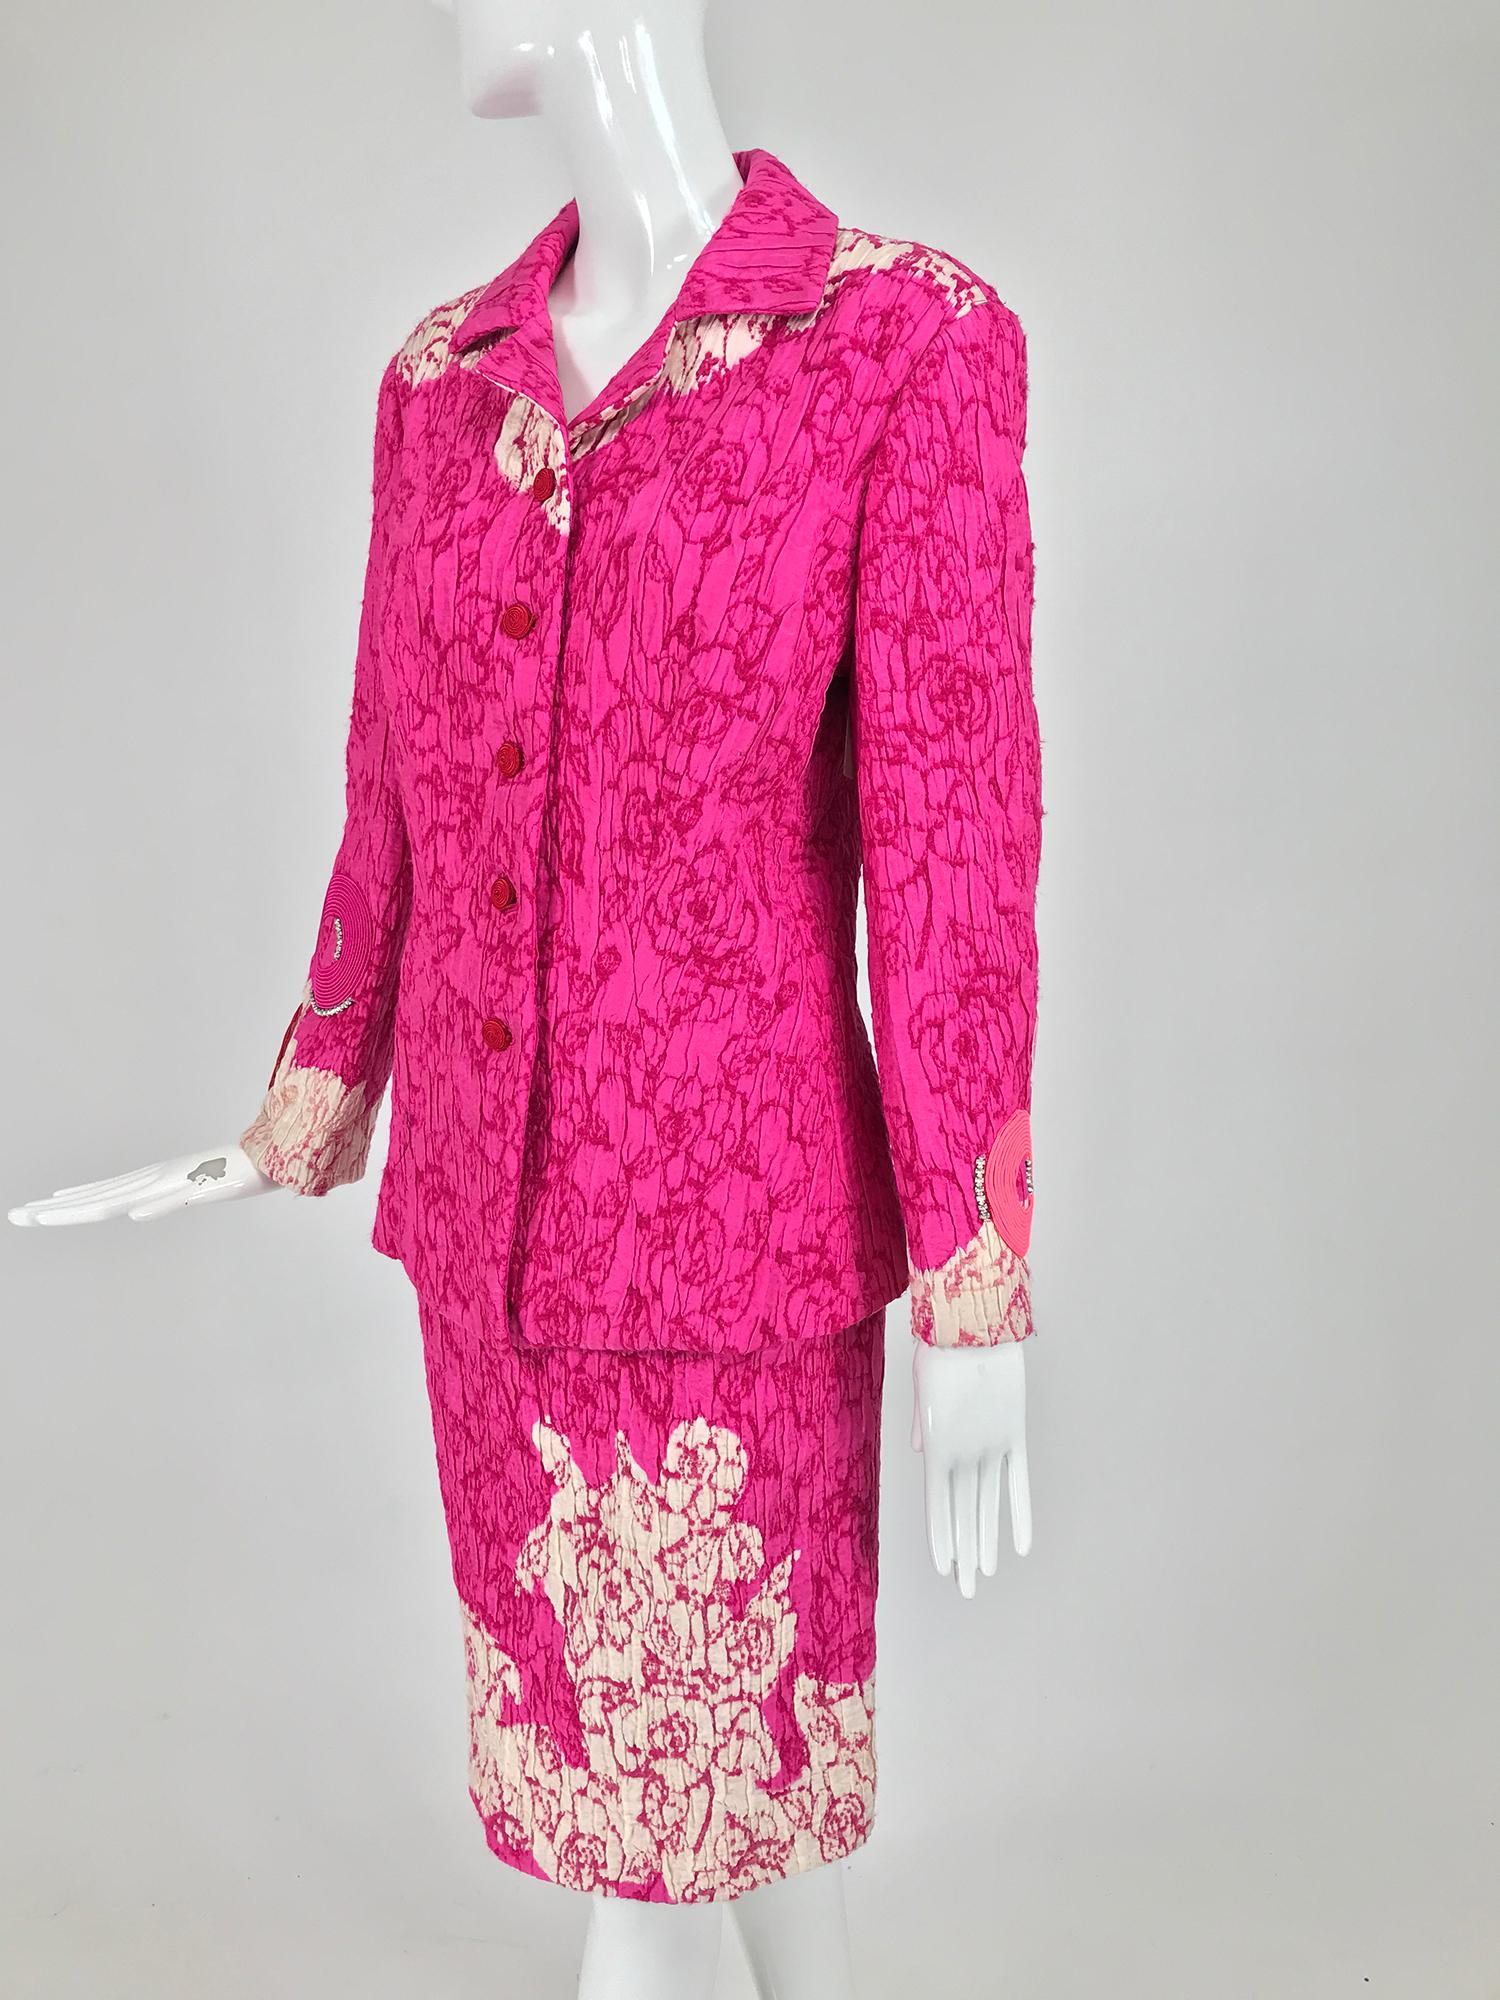 Christian Lacroix Pink Embroidered Silk Applique Skirt Suit 1990s In Good Condition For Sale In West Palm Beach, FL